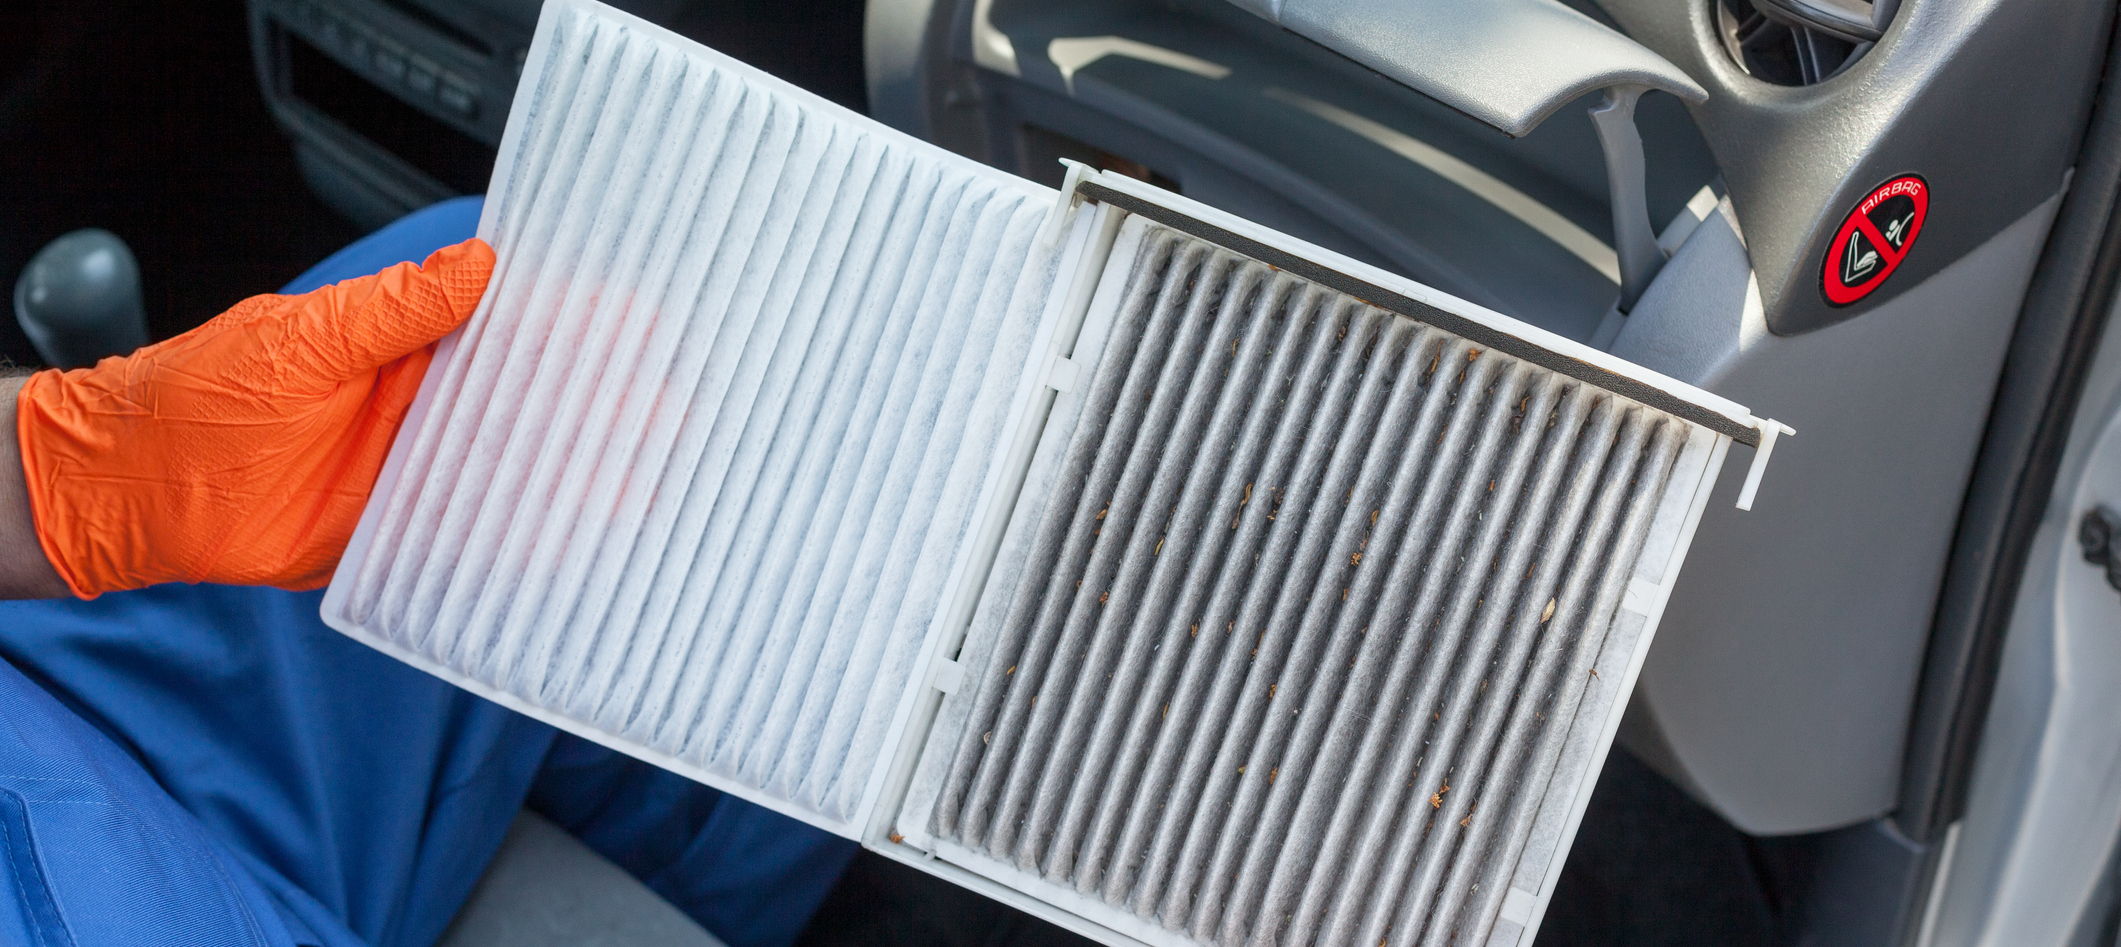 2019 Buick Enclave Cabin Air Filter Location – Gadisyuccavalley 2019 Buick Enclave Cabin Air Filter Replacement